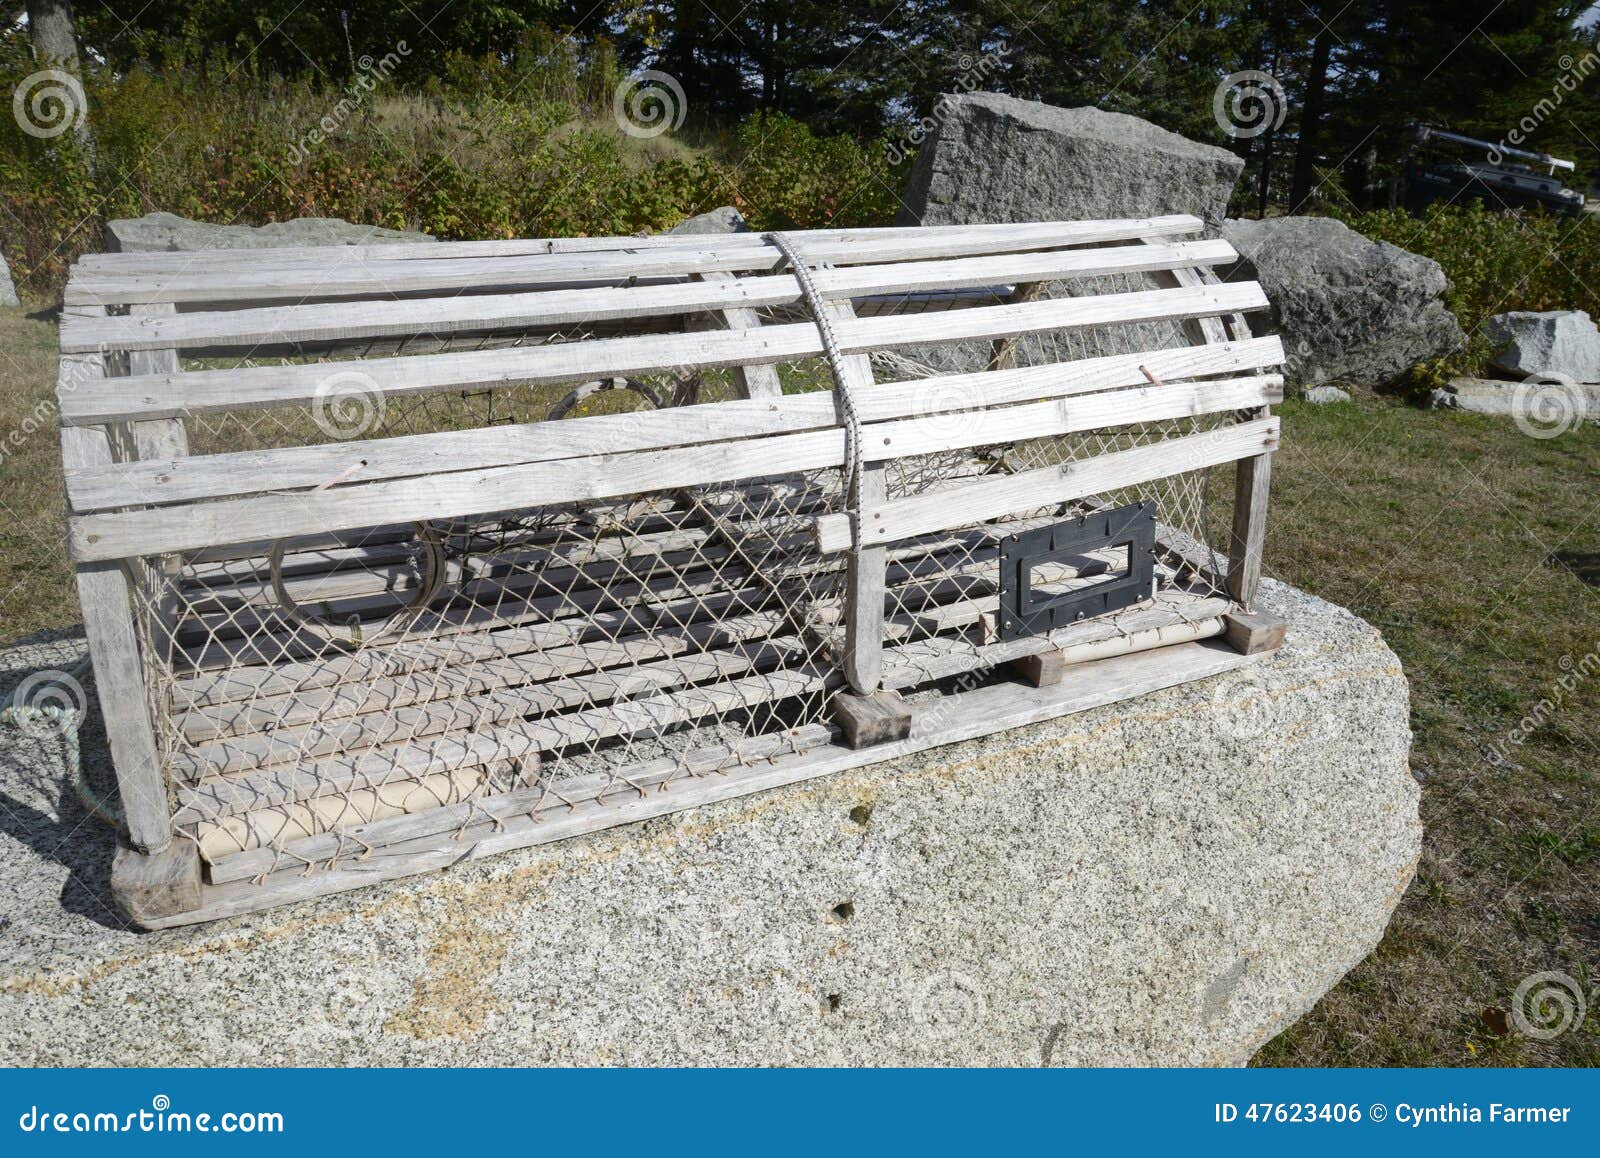 Wood lobster trap stock photo. Image of lobster, rock - 47623406